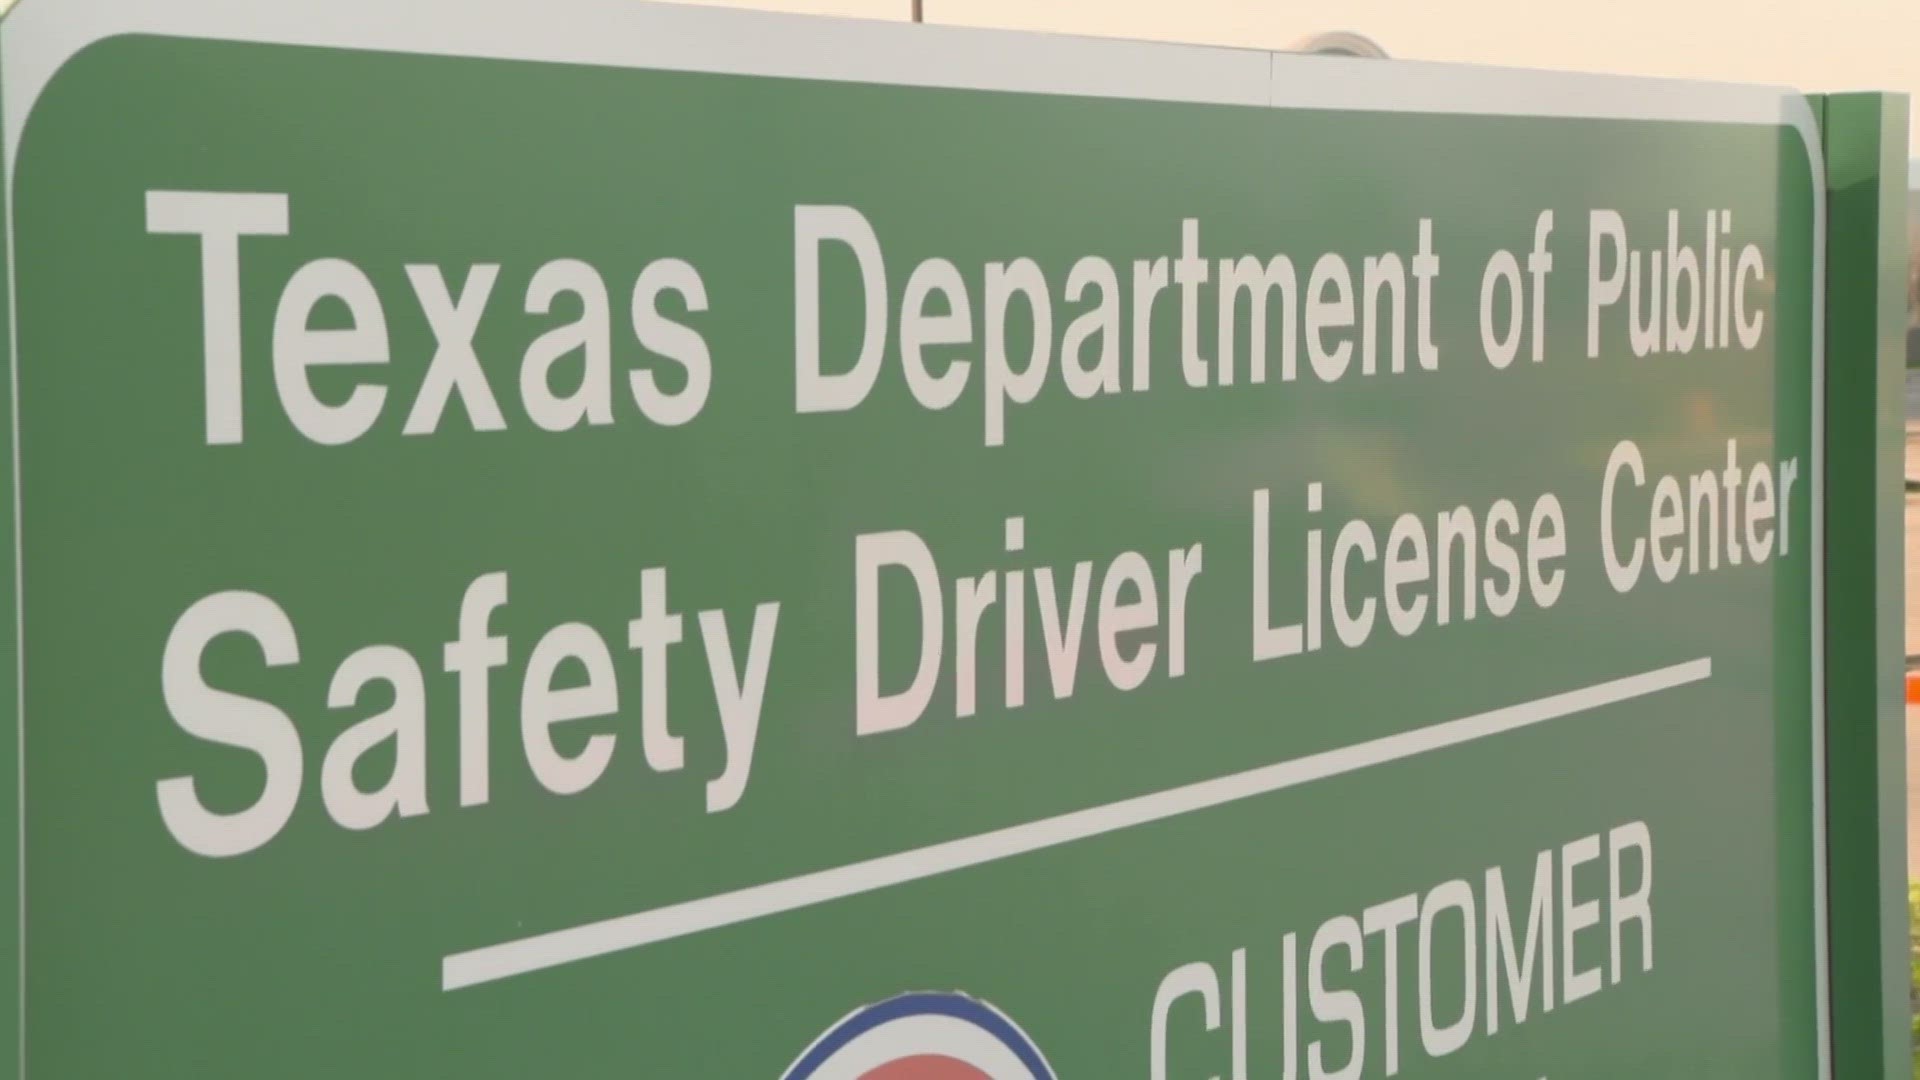 Norma Carrasco is trying to find answers after she applied for a new physical copy of her driver's license back in early February, but has yet to receive it.